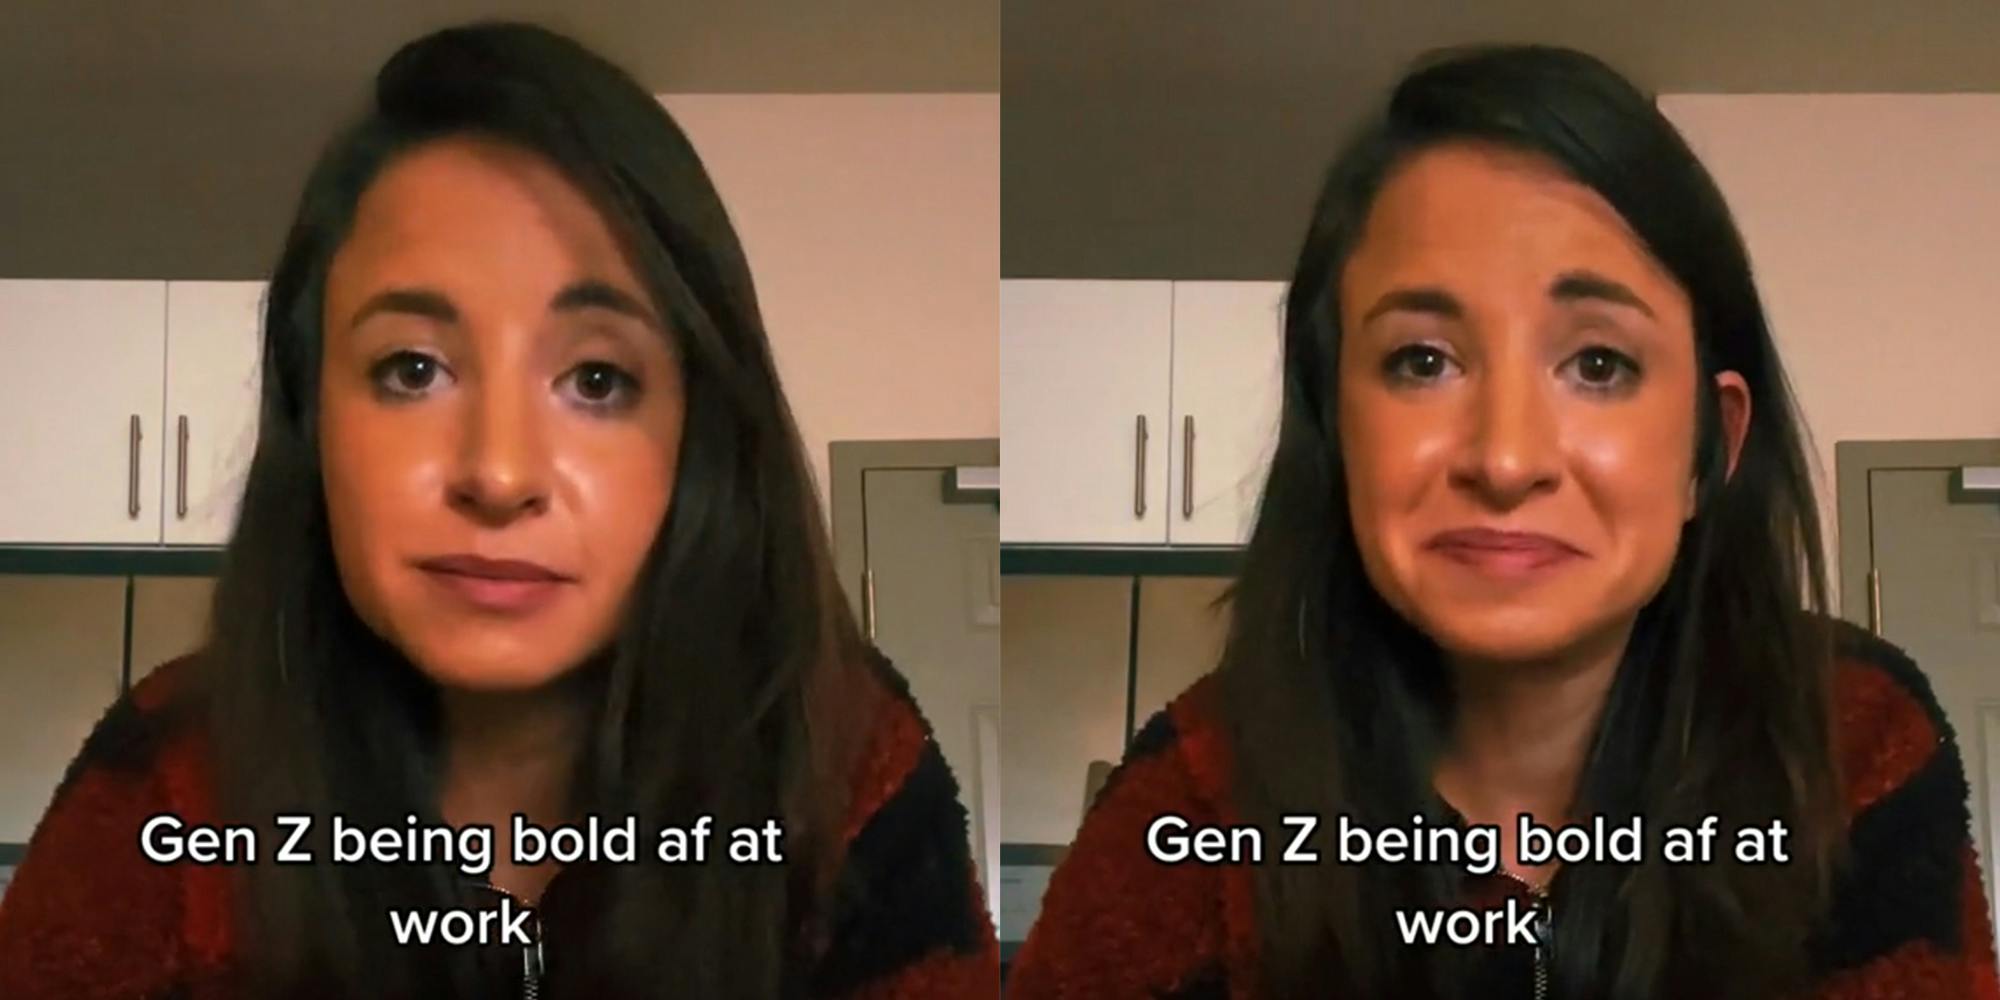 woman in room with caption "Gen Z being bold af at work"